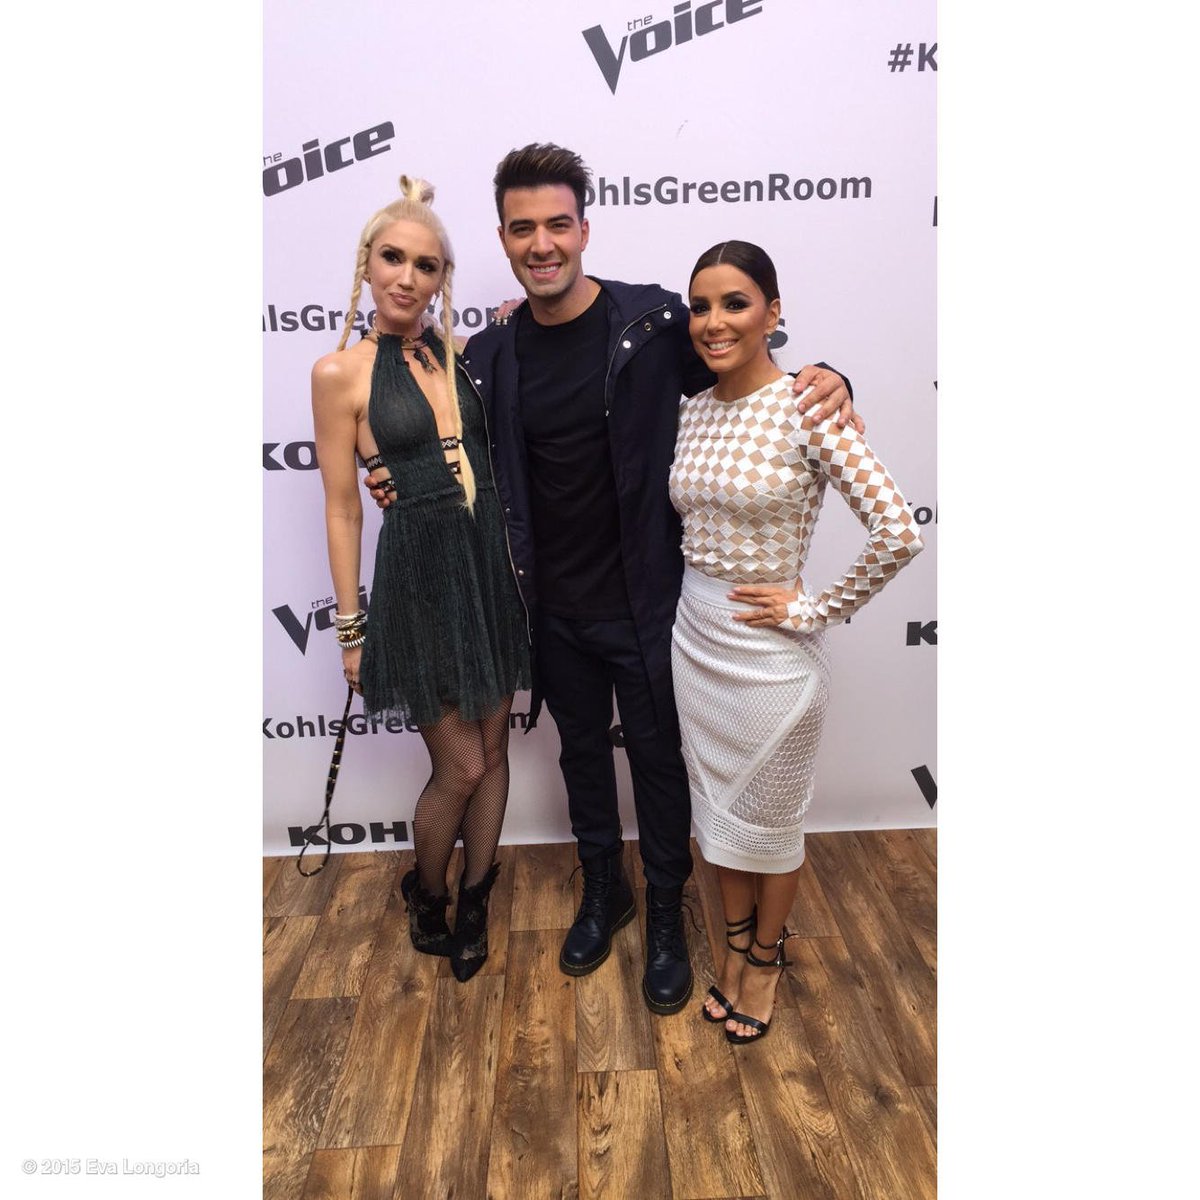 Having so much fun with @jencarlosmusic and @gwenstefani at The Voice! #Telenovela https://t.co/4ReGIPFcwF